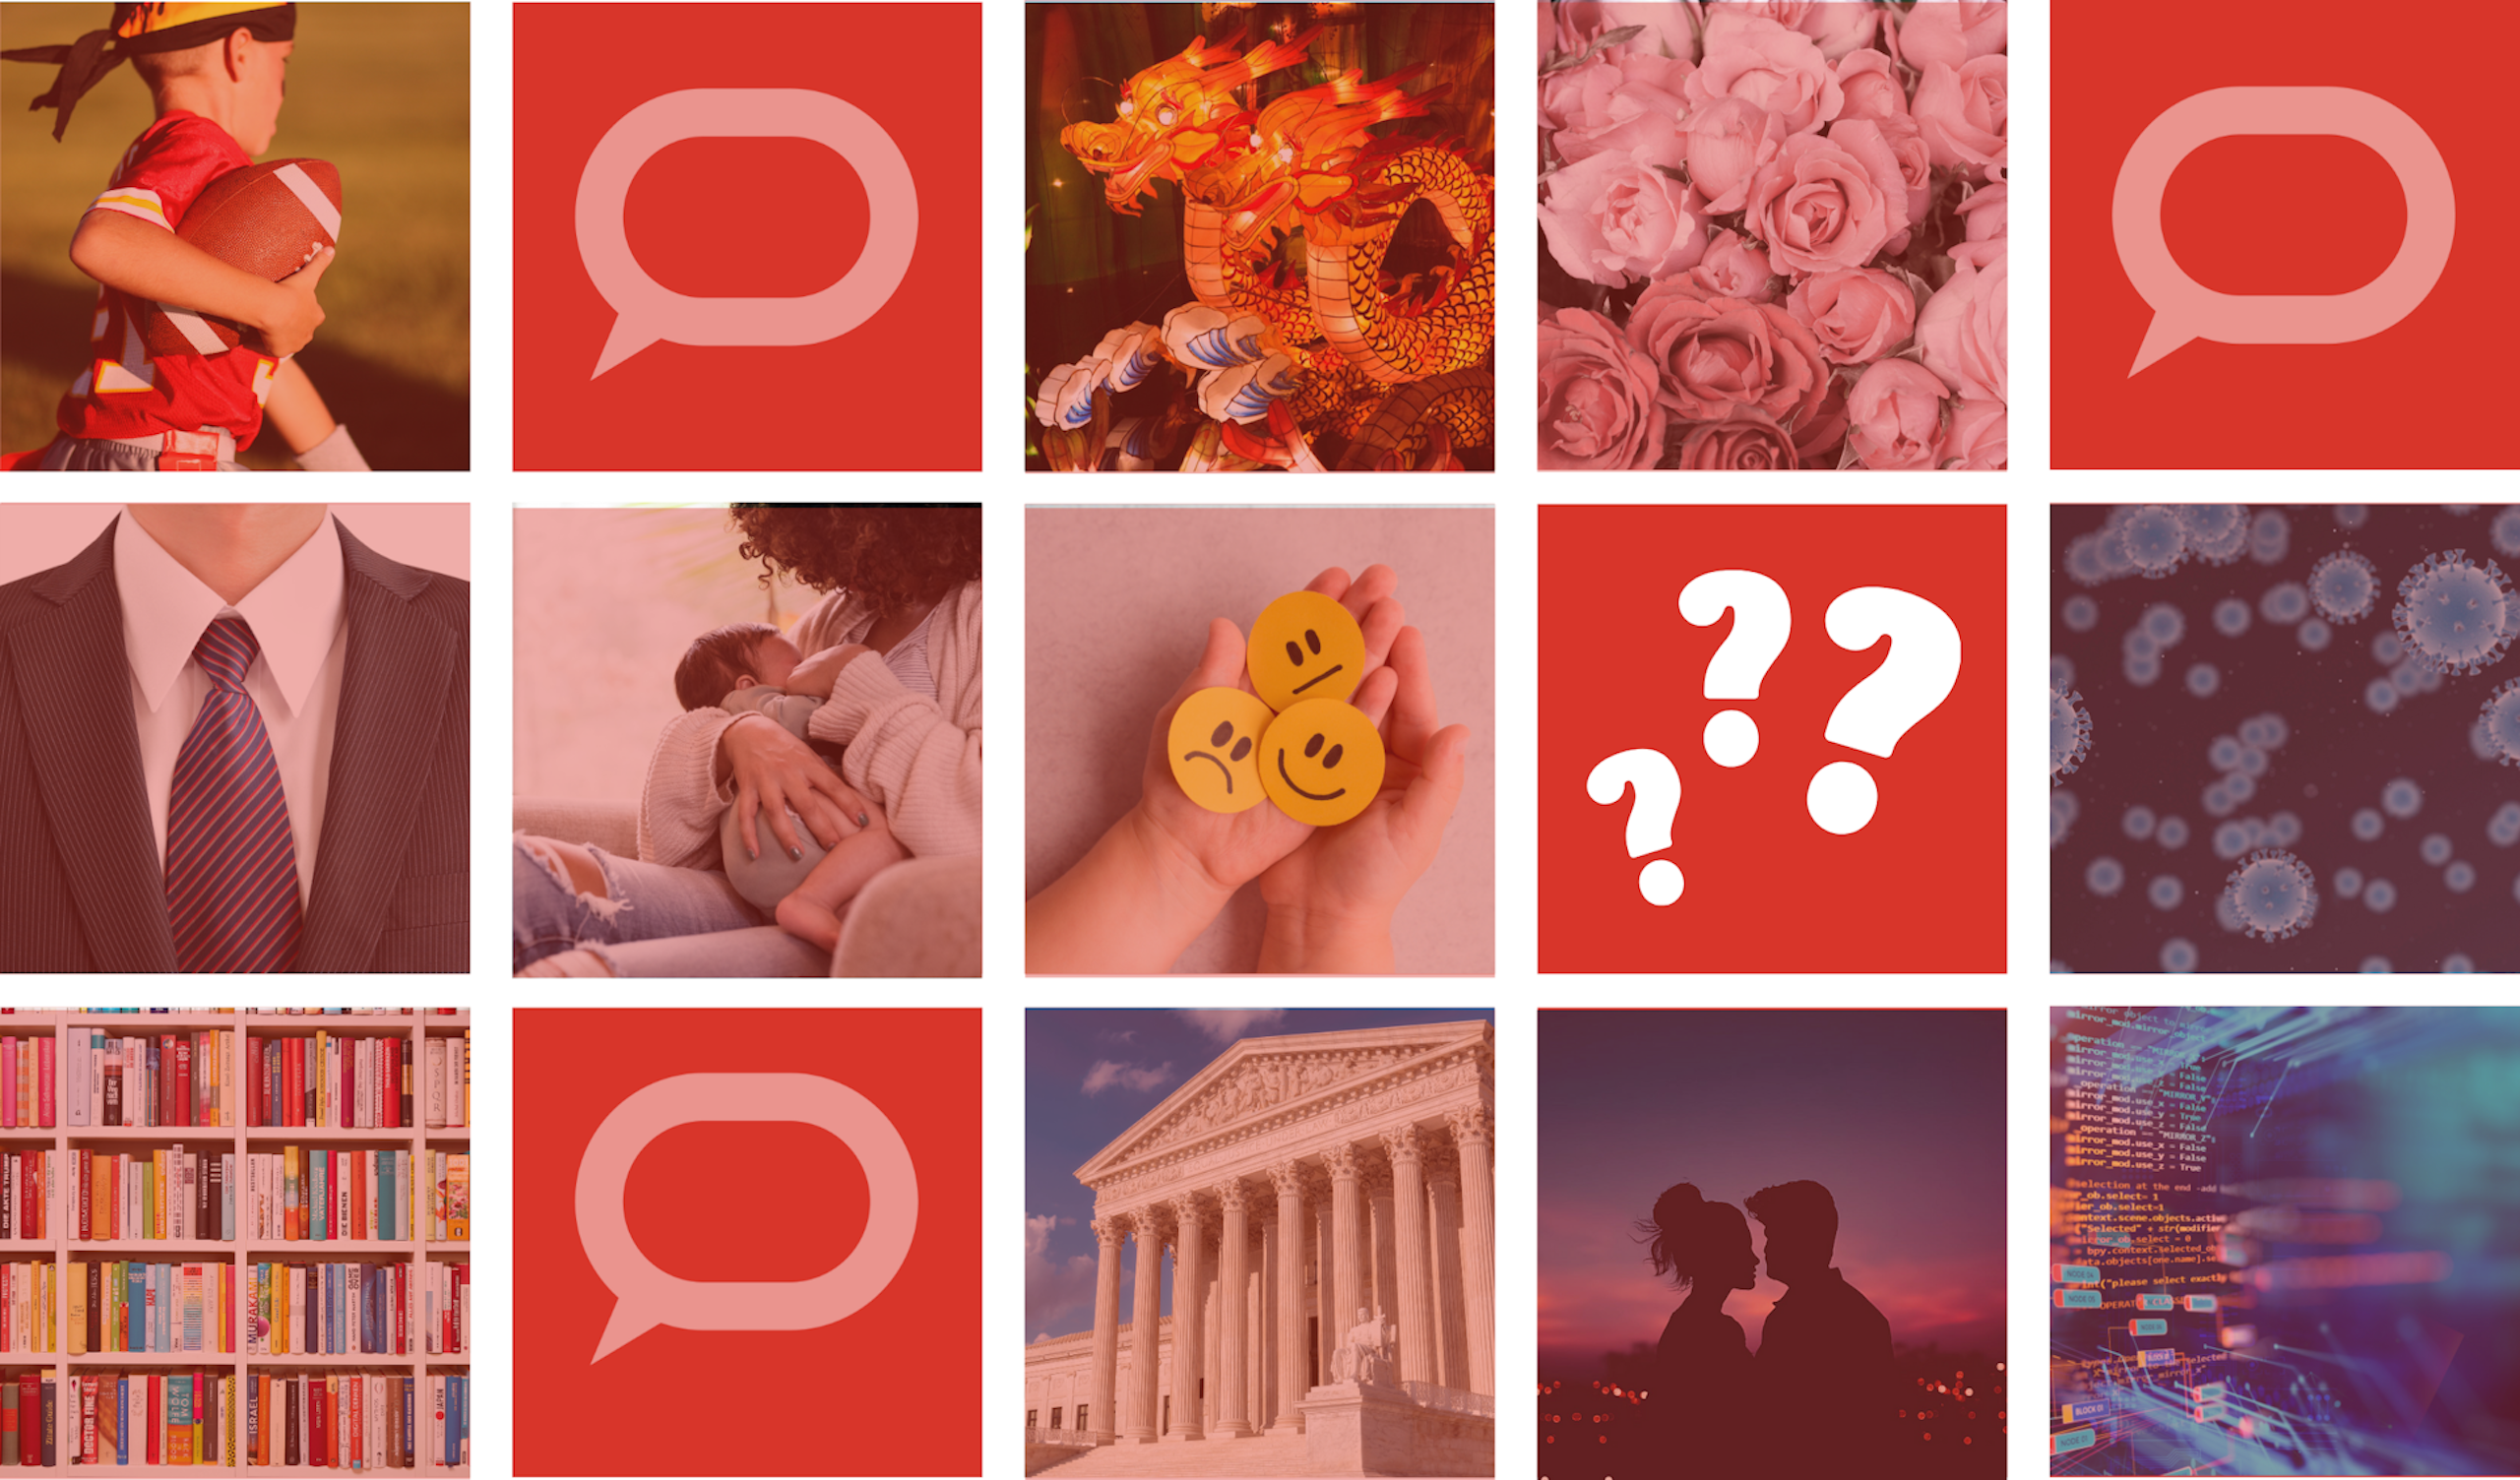 A graphic showing a wide variety of questions marks and stock images representative of the quiz